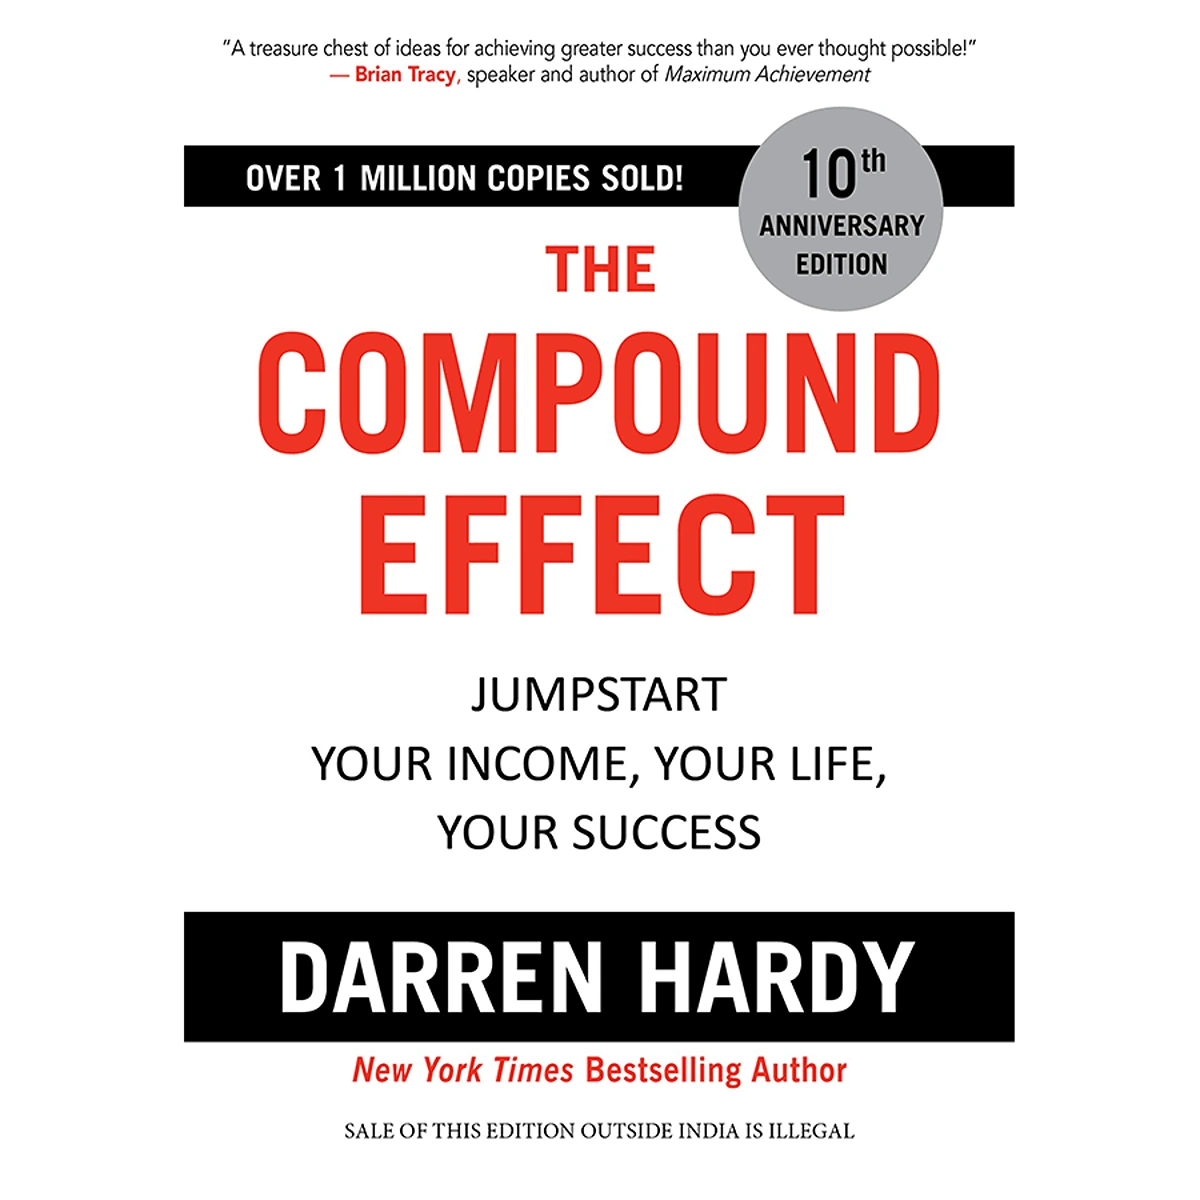 the-compound-effect-jumpstart-your-income-your-life-your-success-by-darren-hardy